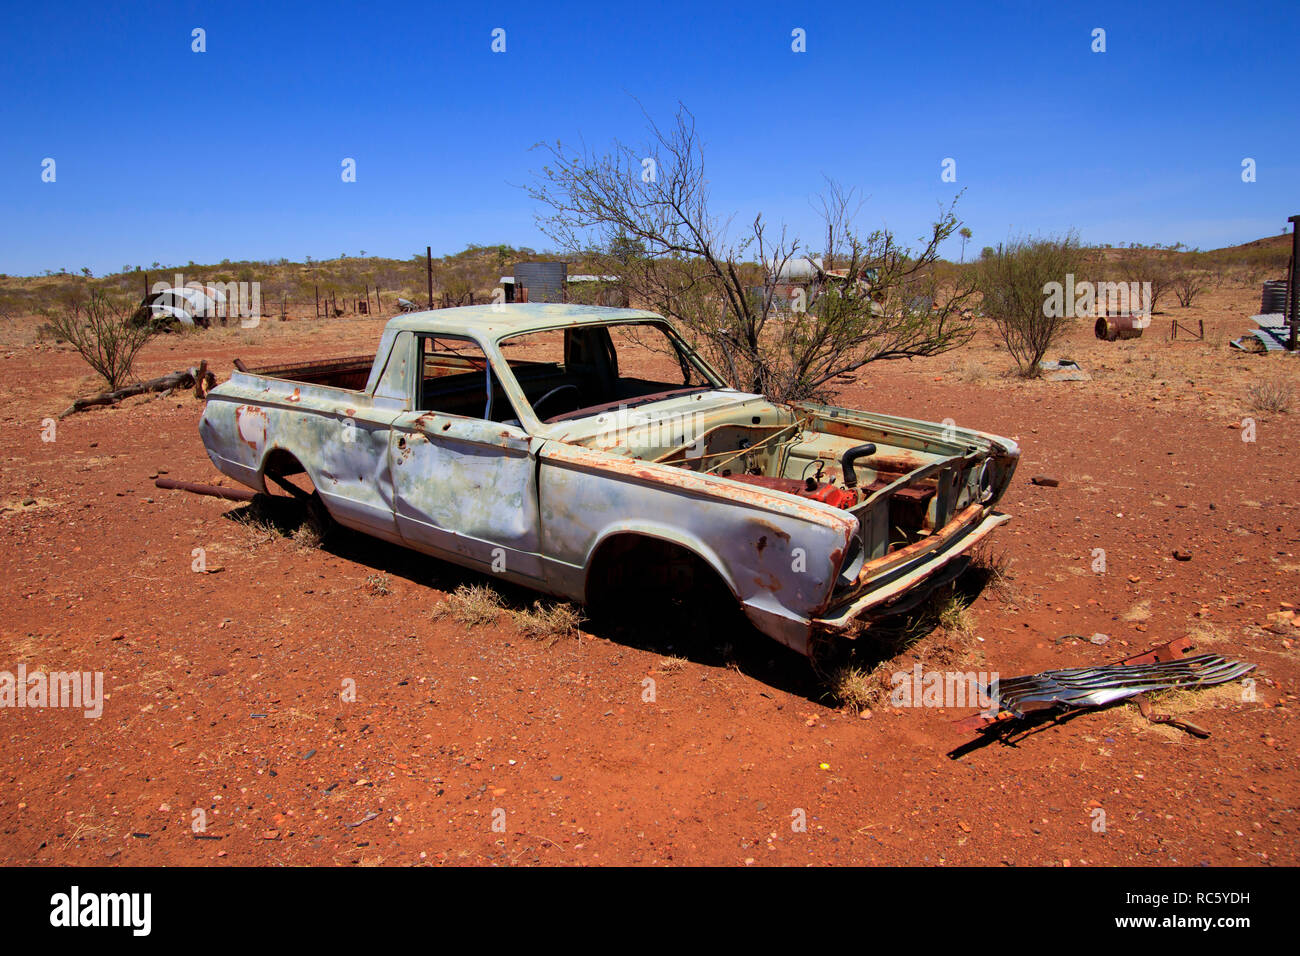 An old pick up truck utility lies abandoned in the Australian outback with blue sky and red soil. Stock Photo